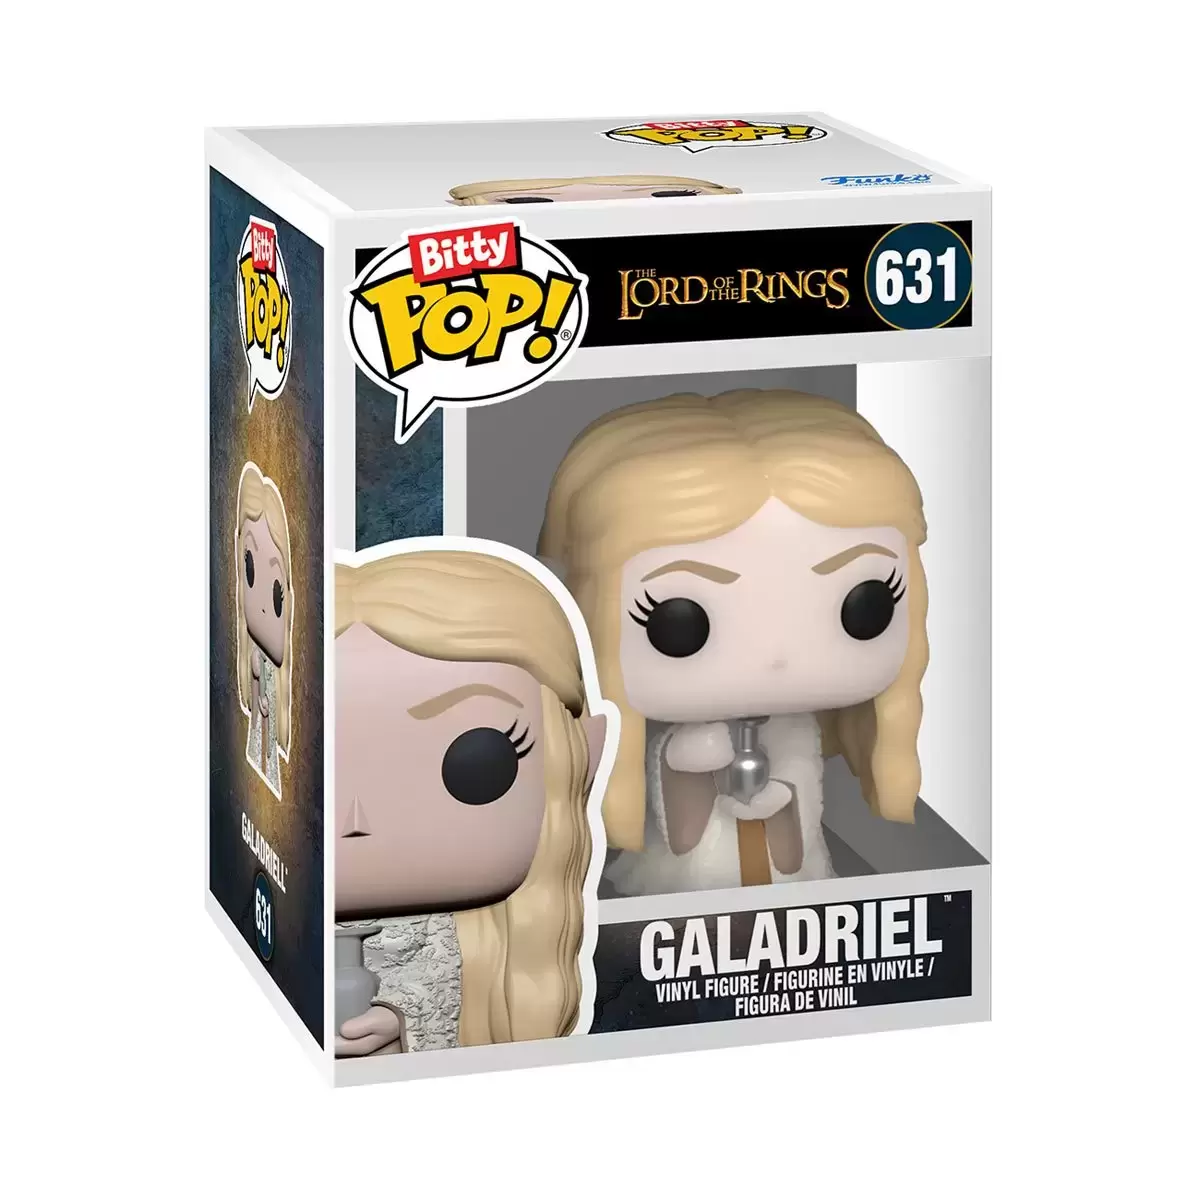 Bitty POP! - Lord of The Rings - Galadriel